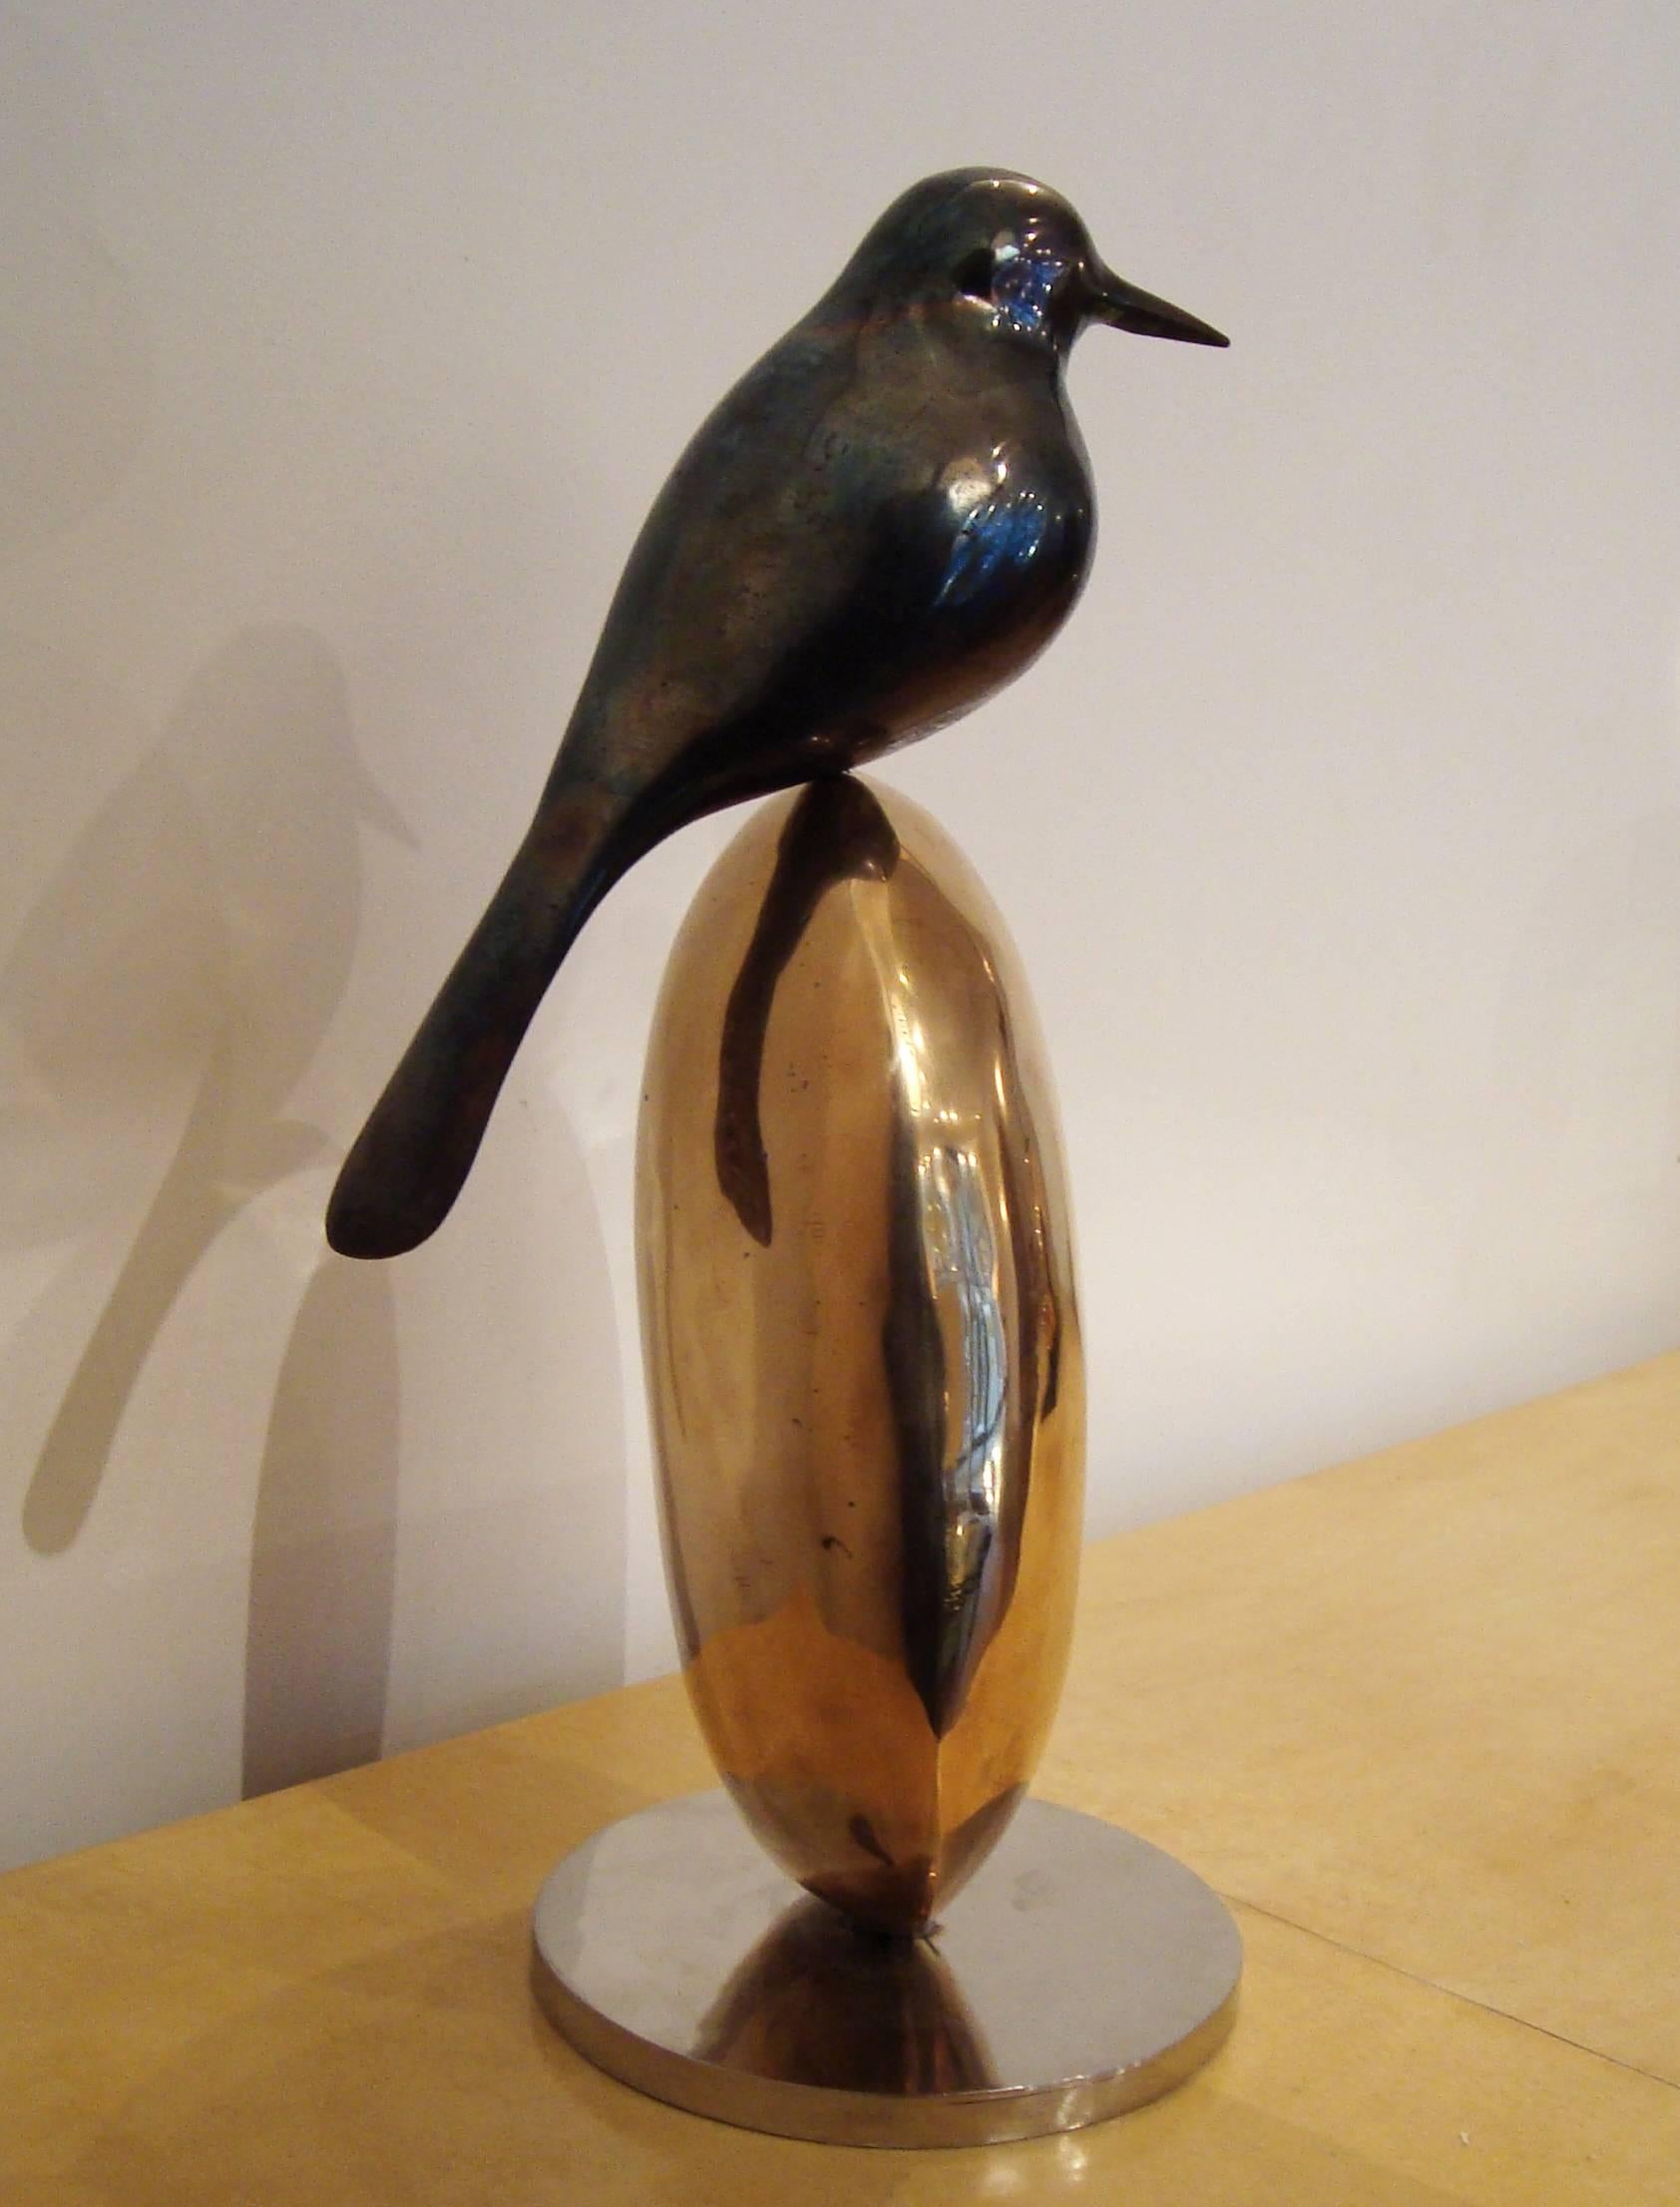 Beautiful bronze sculpture of a bird on rock, circa 1980, by R.Broissand (1928-).
Looks like a big blackbird. 
Patinated and gilt polished bronze. Circular base. 
Signed 